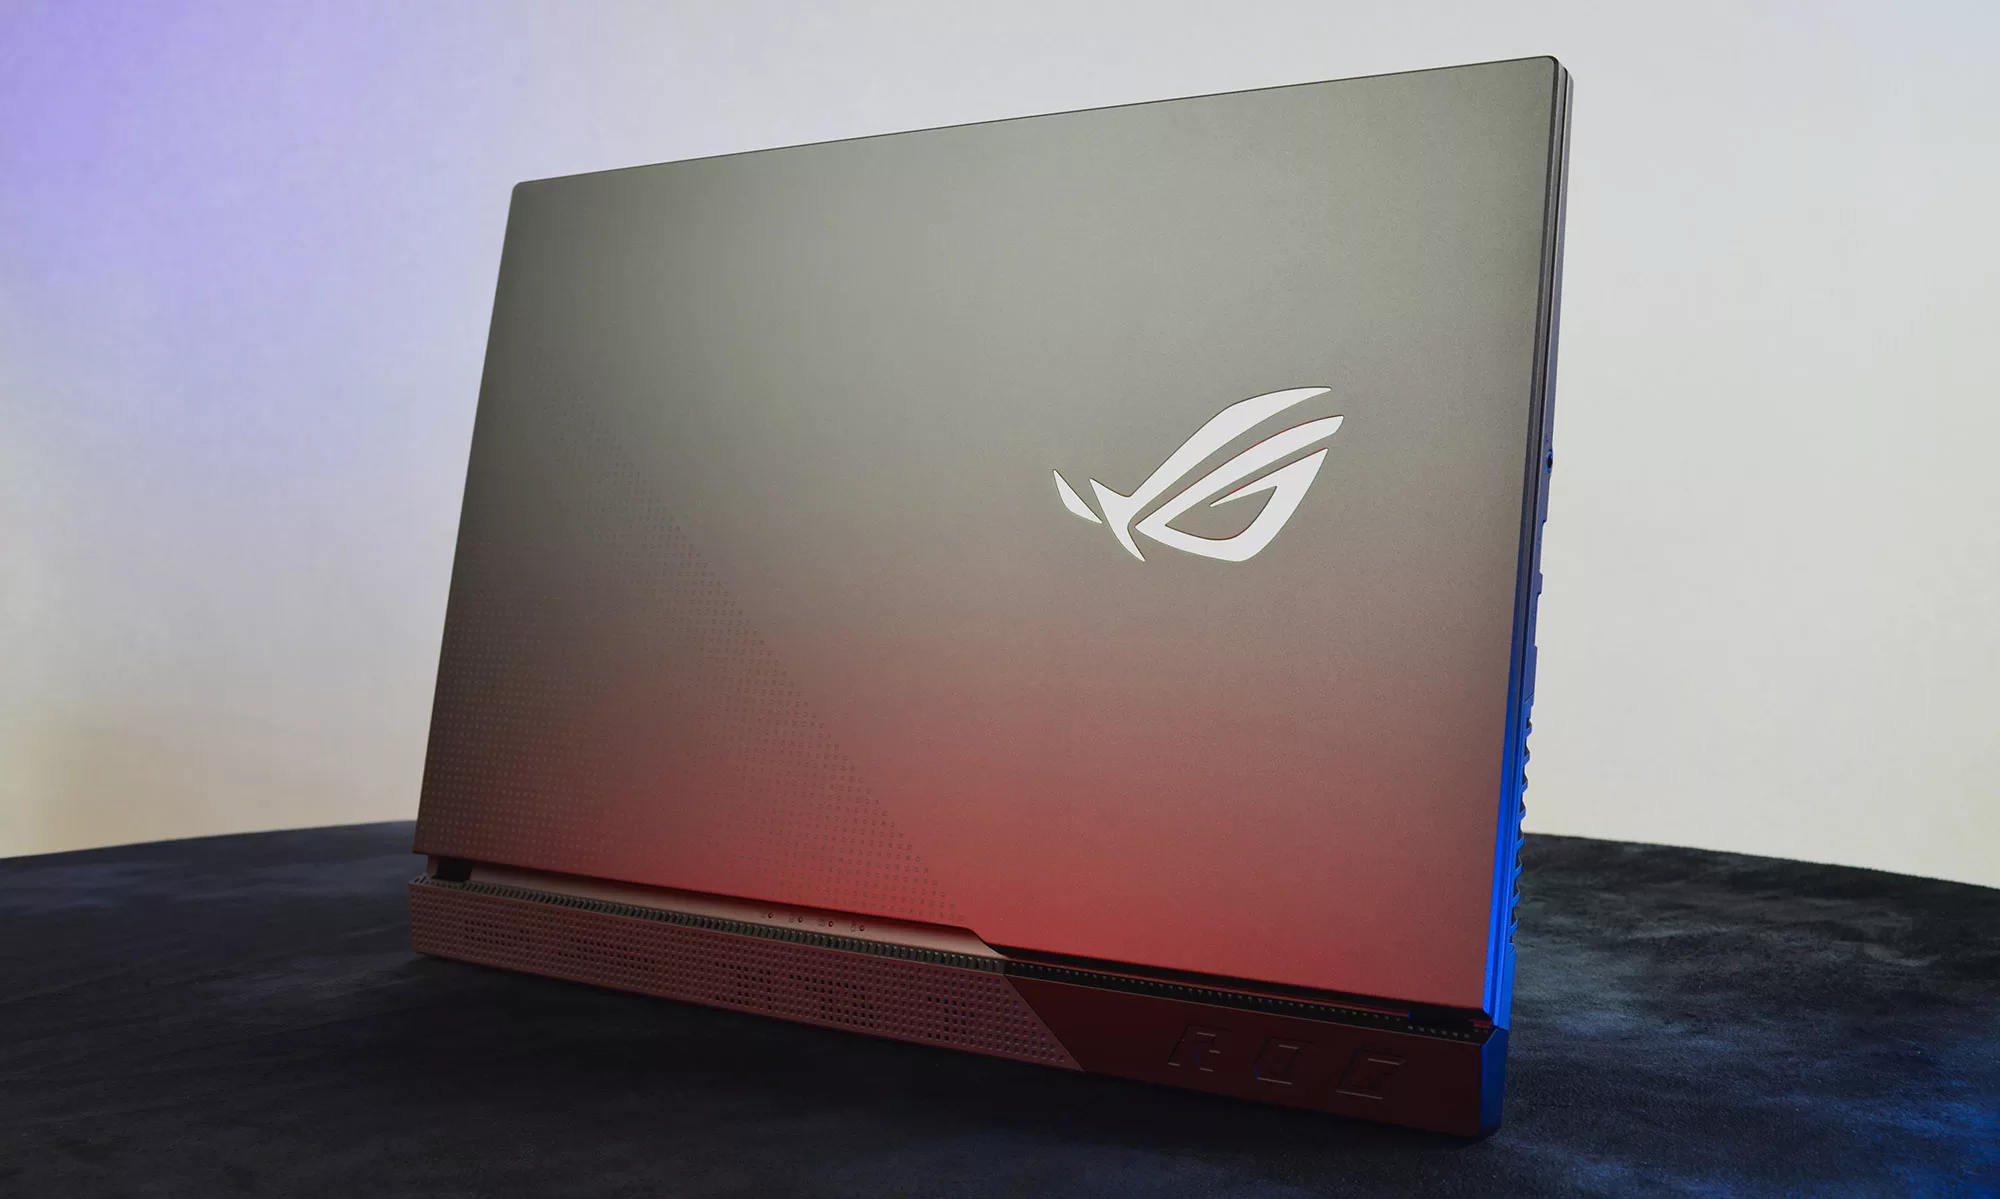 ROG Strix G17 standing on its edge, with the lid and ROG eye logo visible.